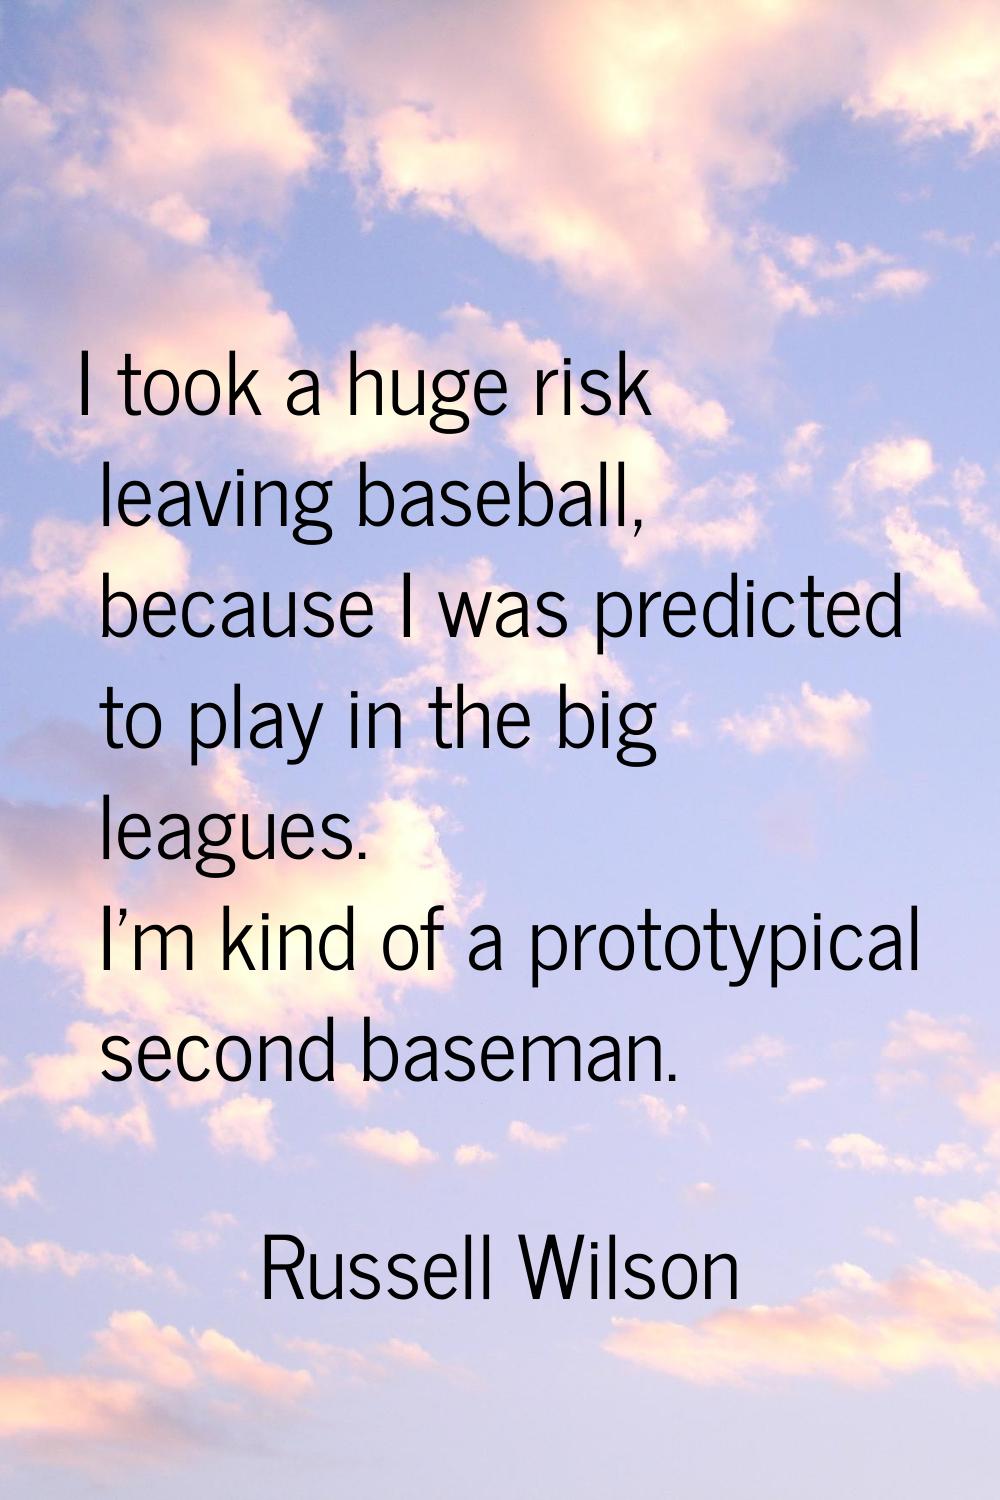 I took a huge risk leaving baseball, because I was predicted to play in the big leagues. I'm kind o